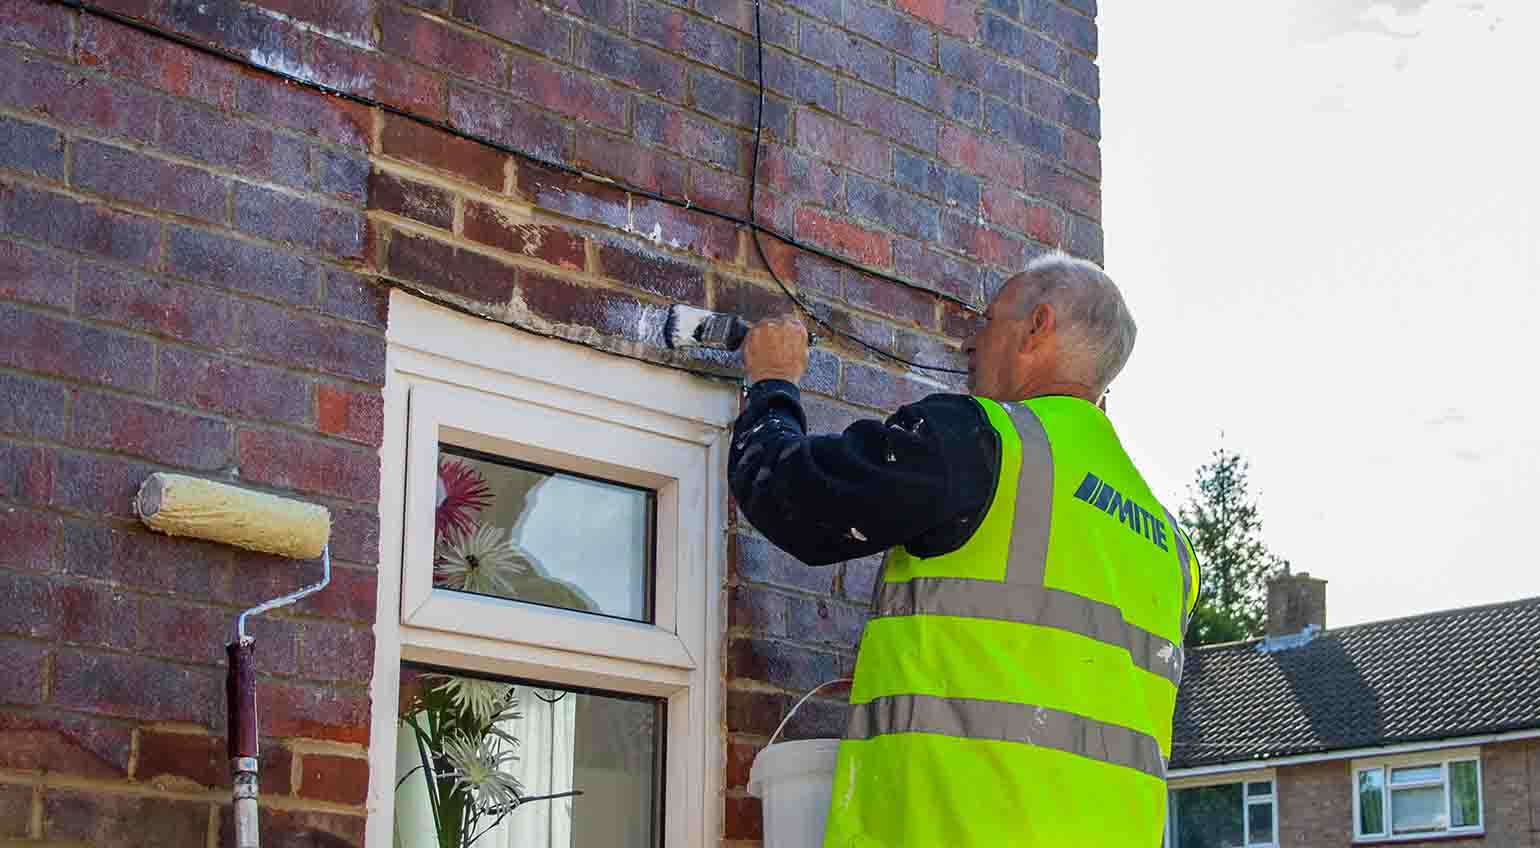 Stormdry being applied with a brush to treat porous bricks